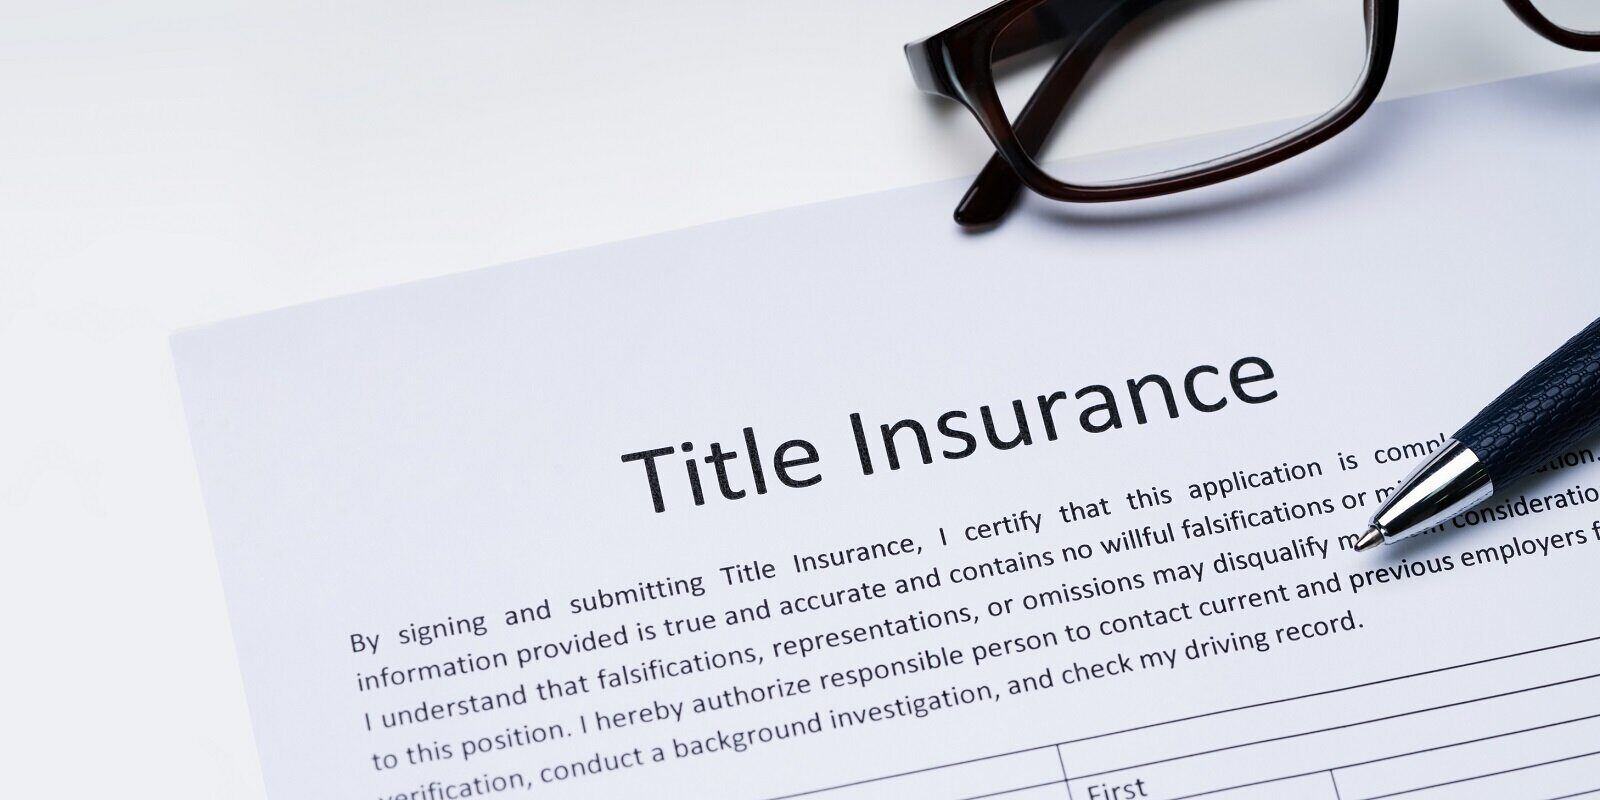 What is title insurance? Why do I need it for my new house?